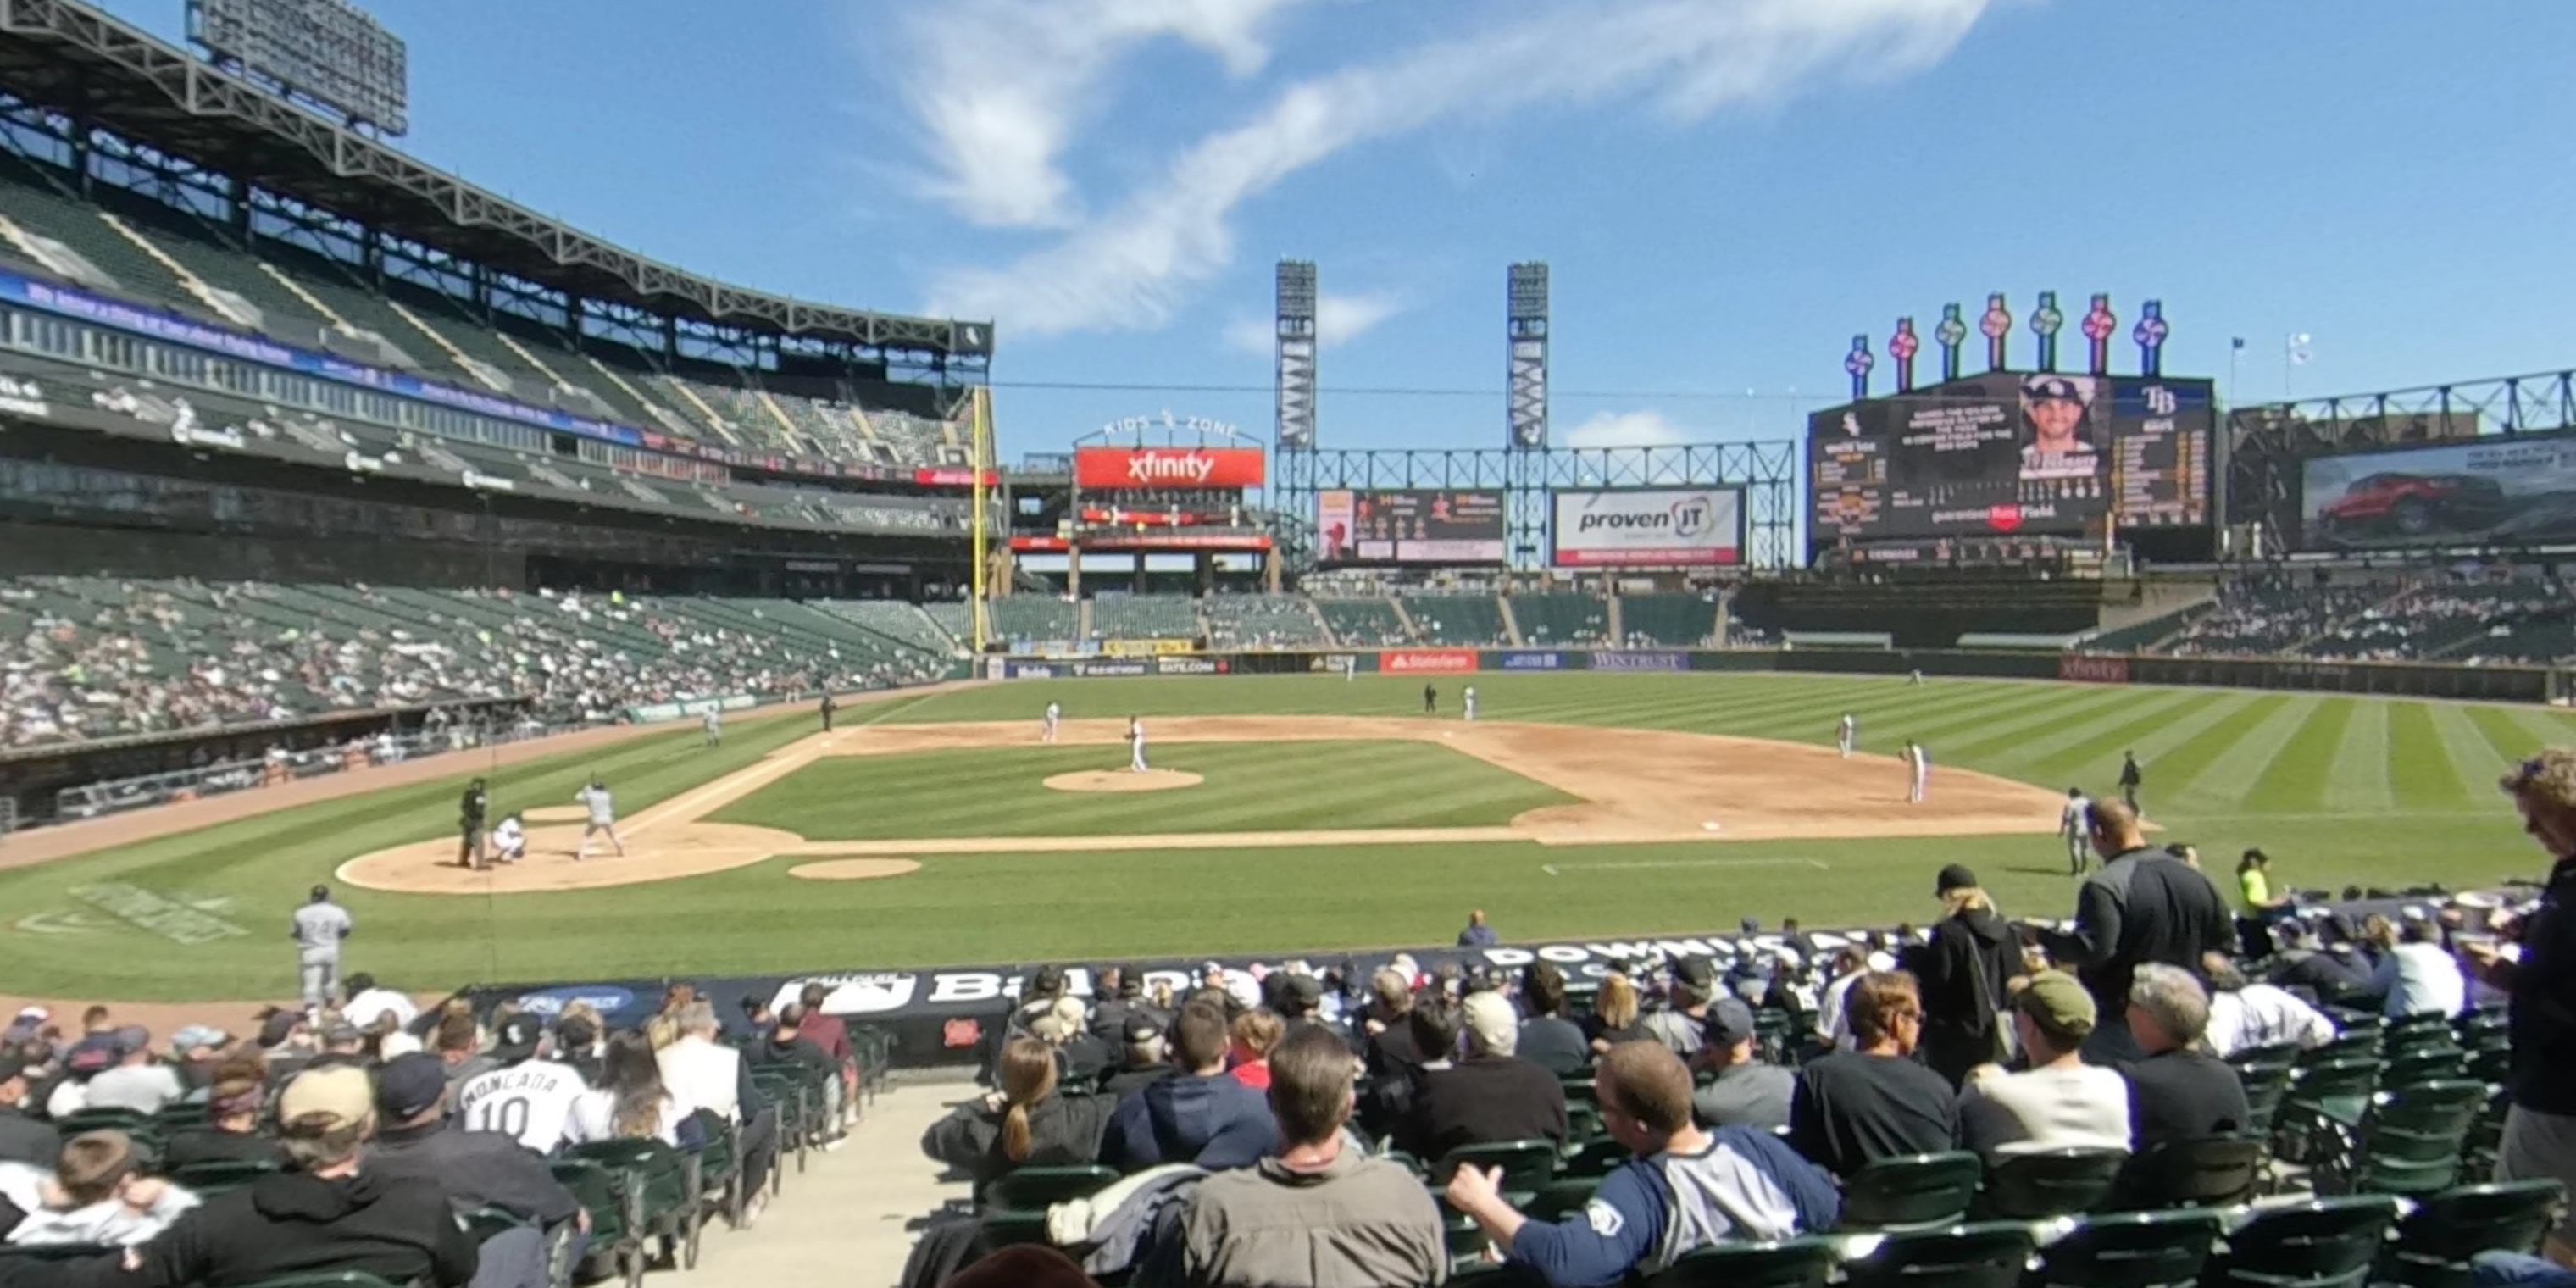 section 126 panoramic seat view  - guaranteed rate field